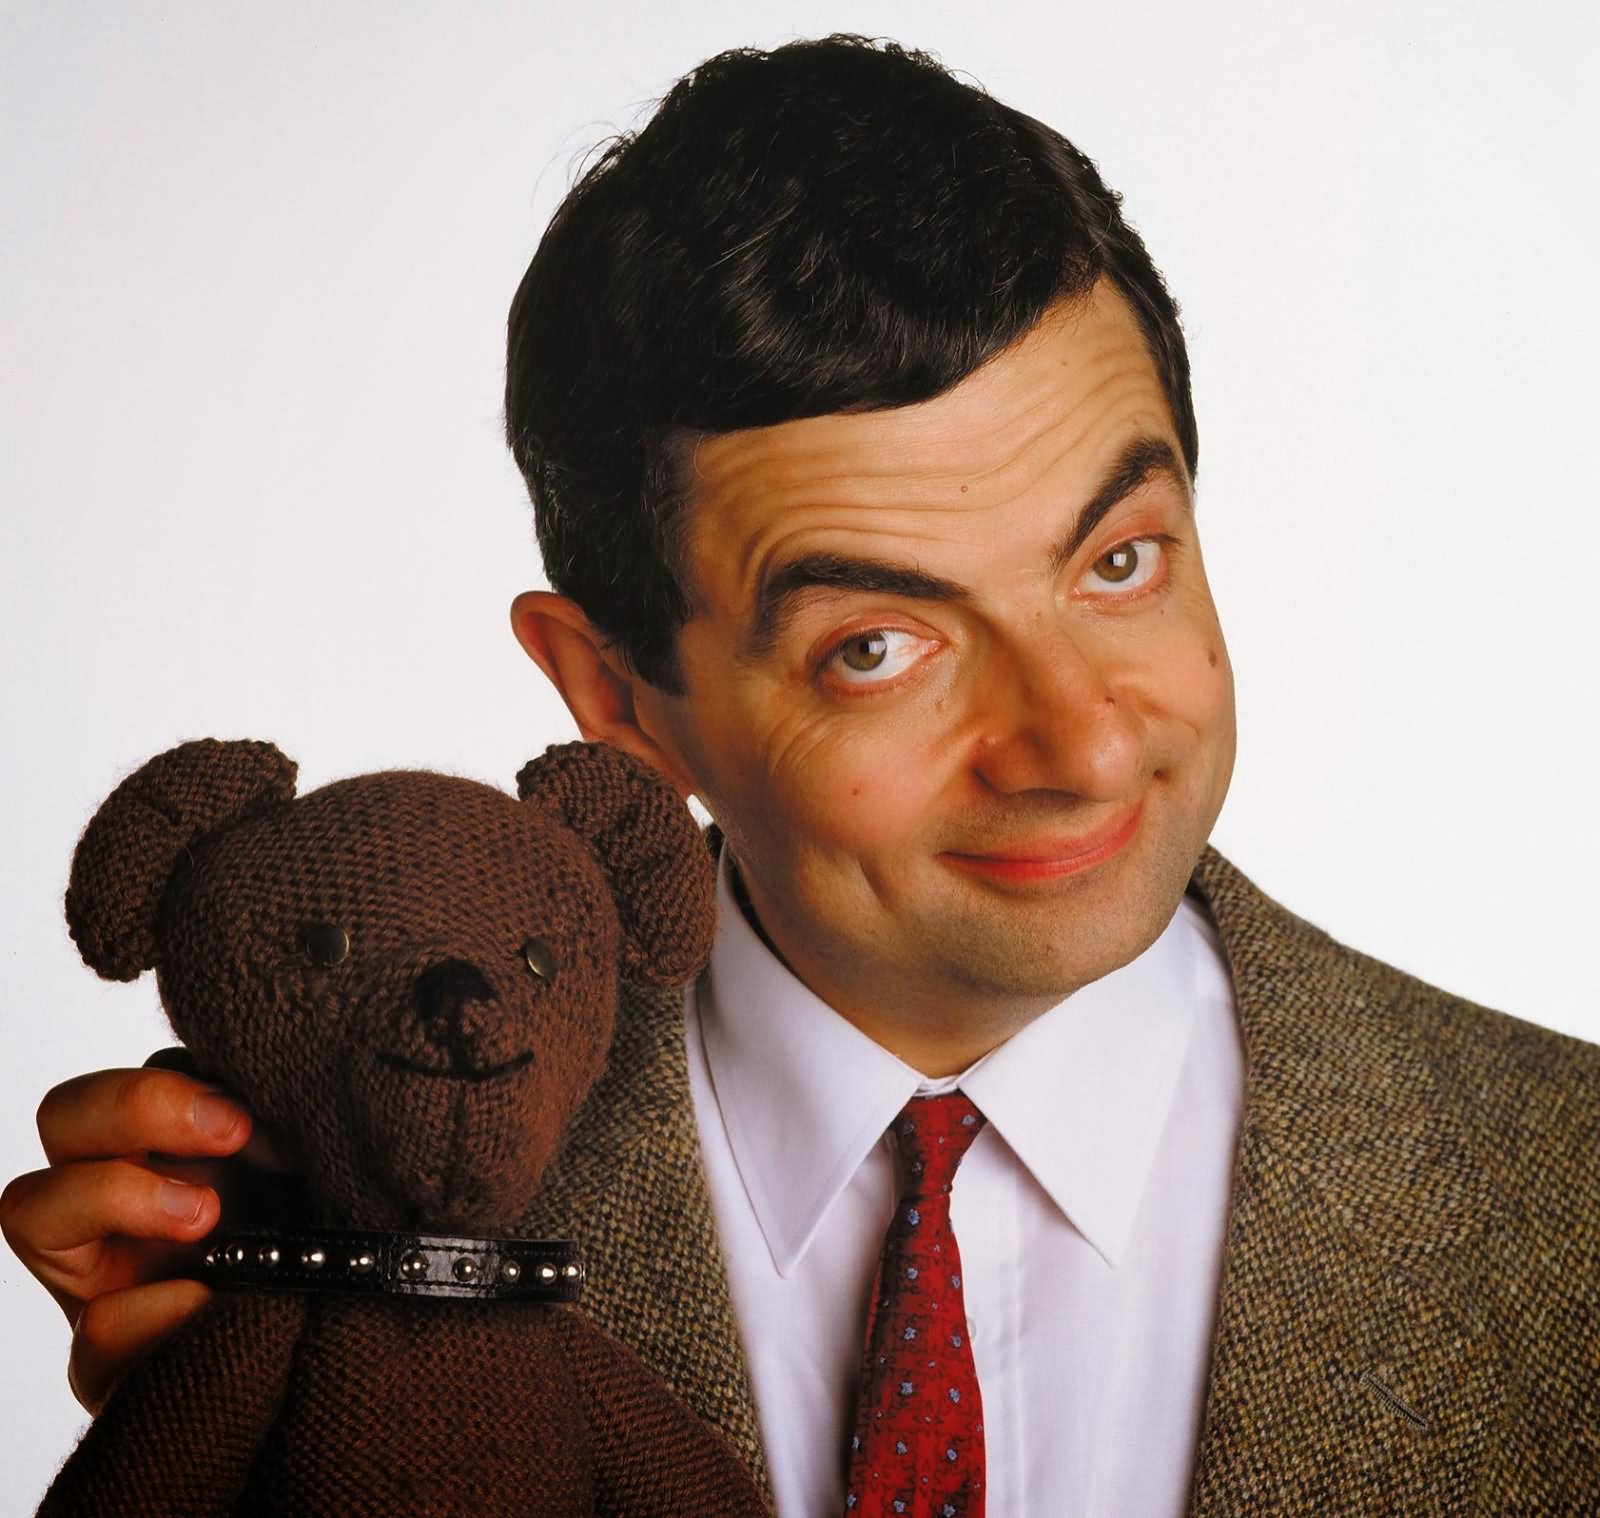 Smiling-Mr-Bean-With-Teddy-Funny-Image